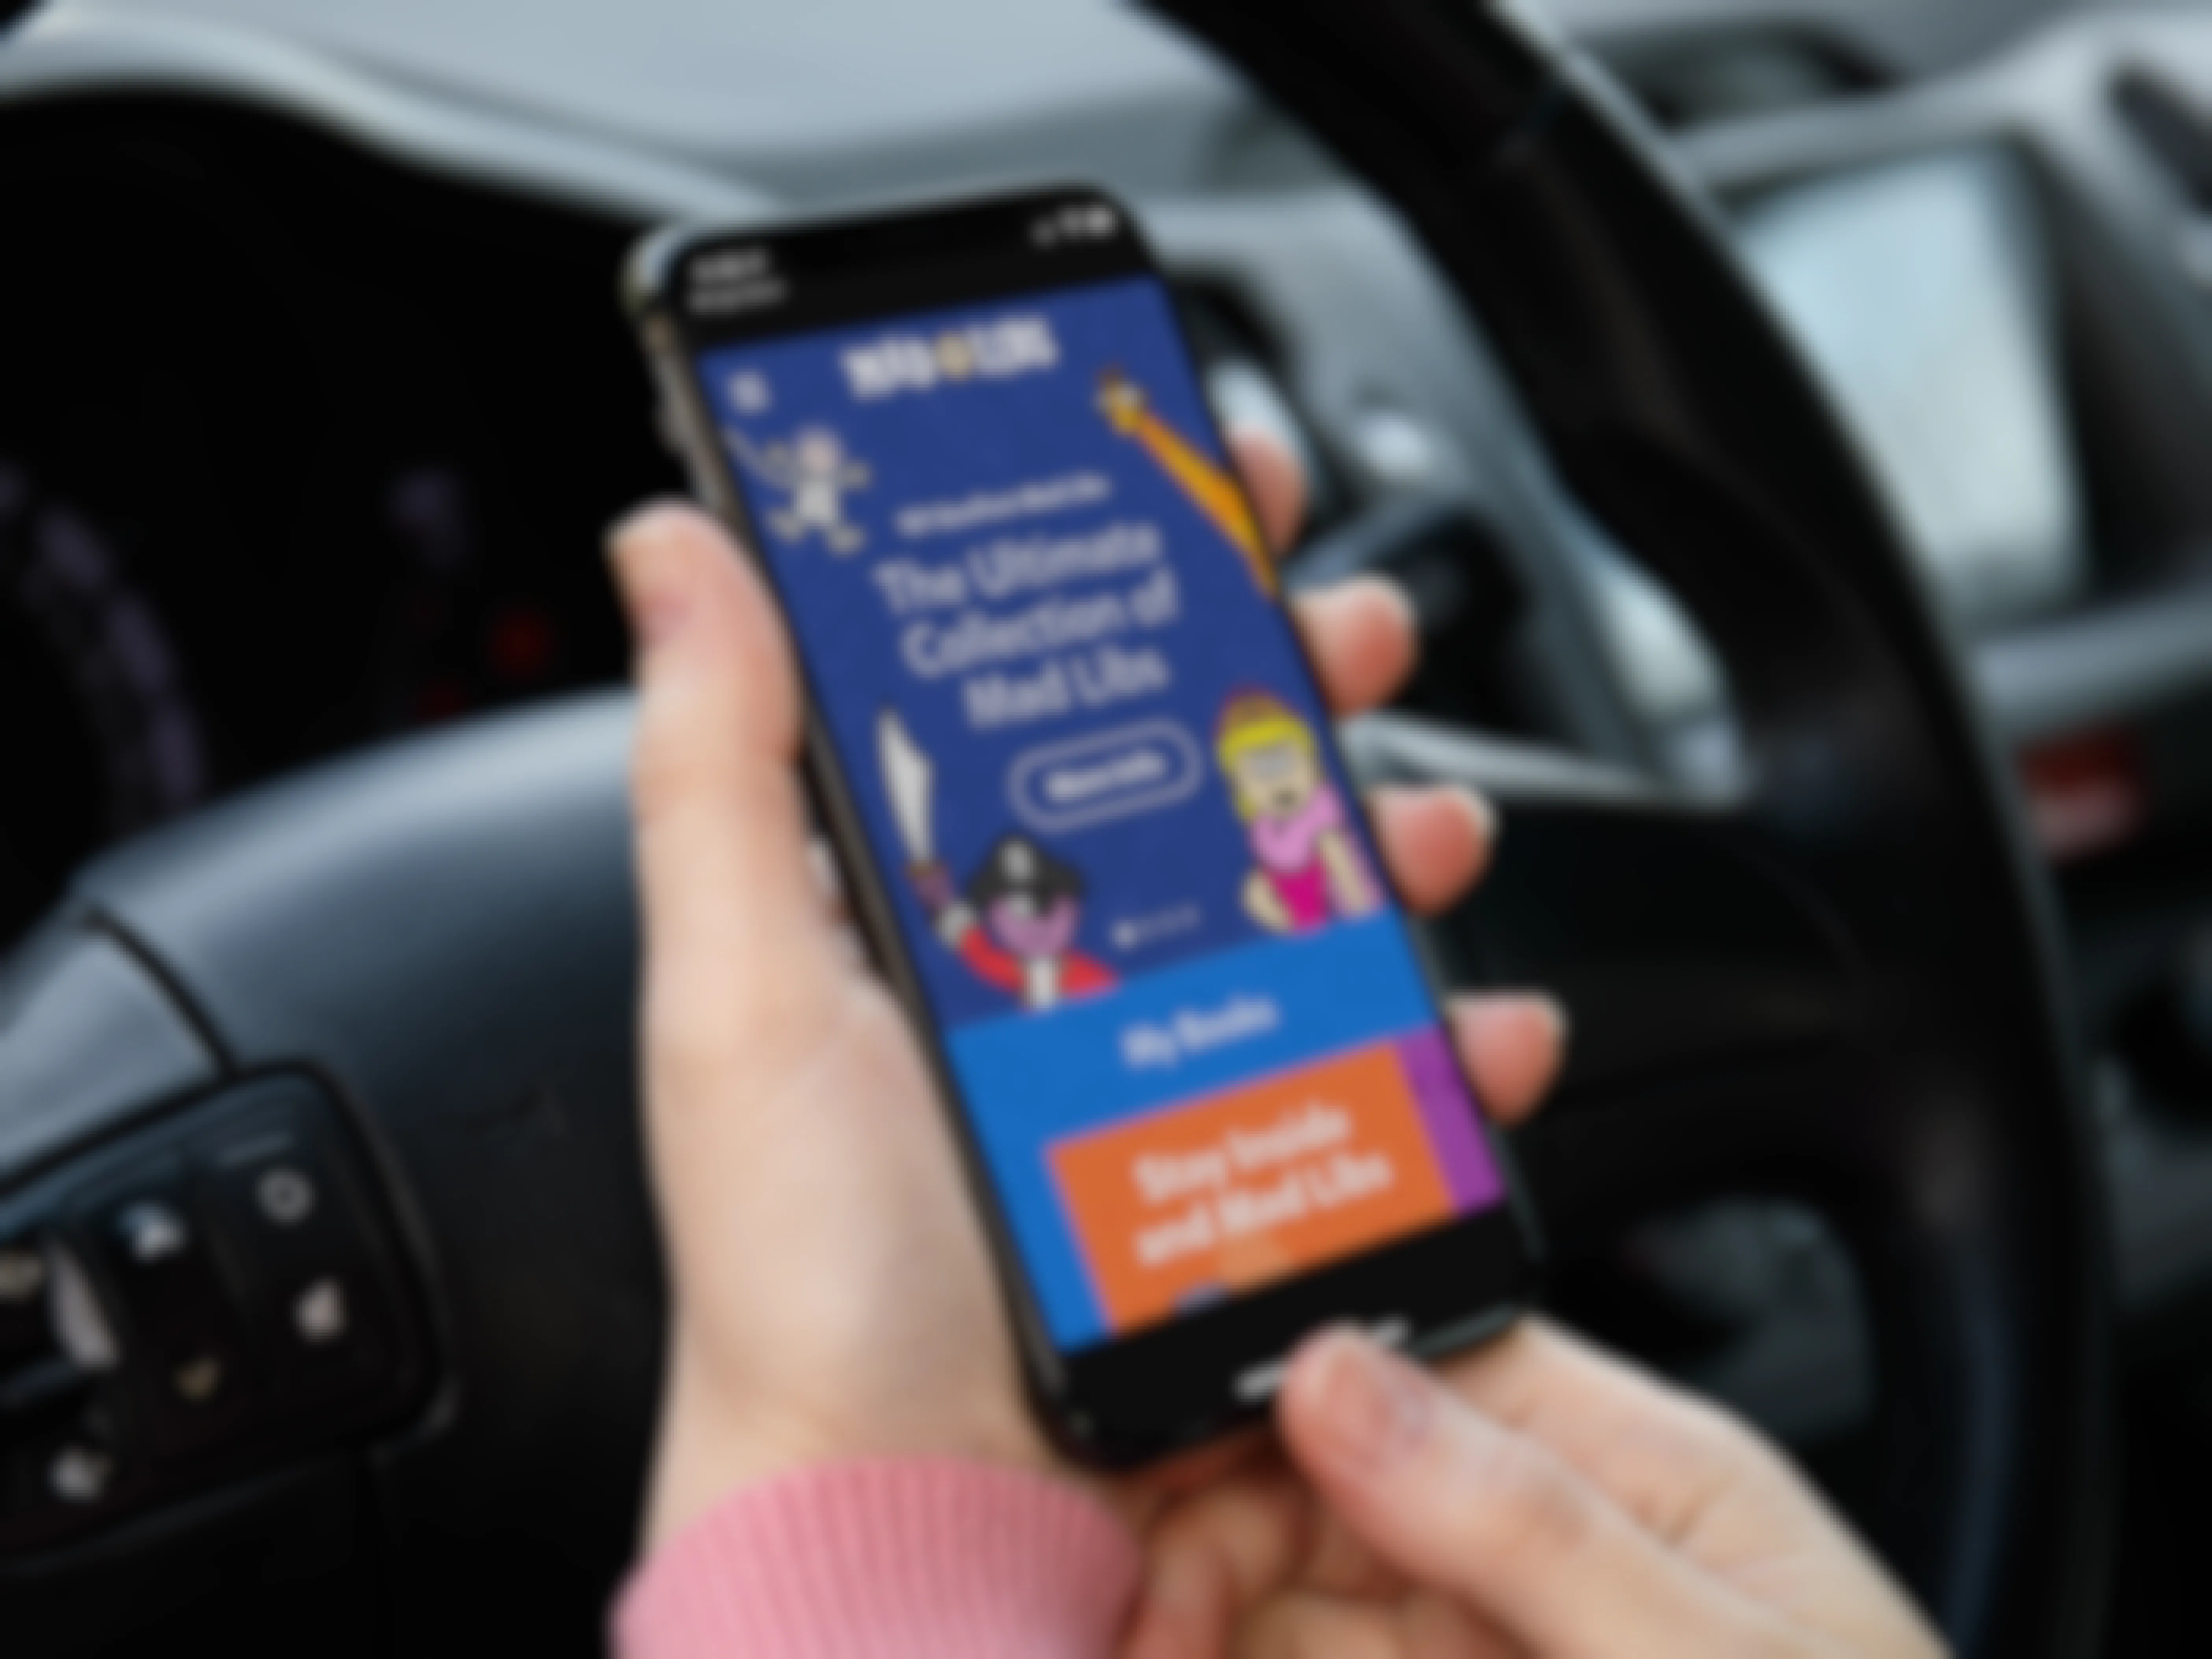 A person sitting in a car, holding an iPhone displaying the Mad Libs app home screen.